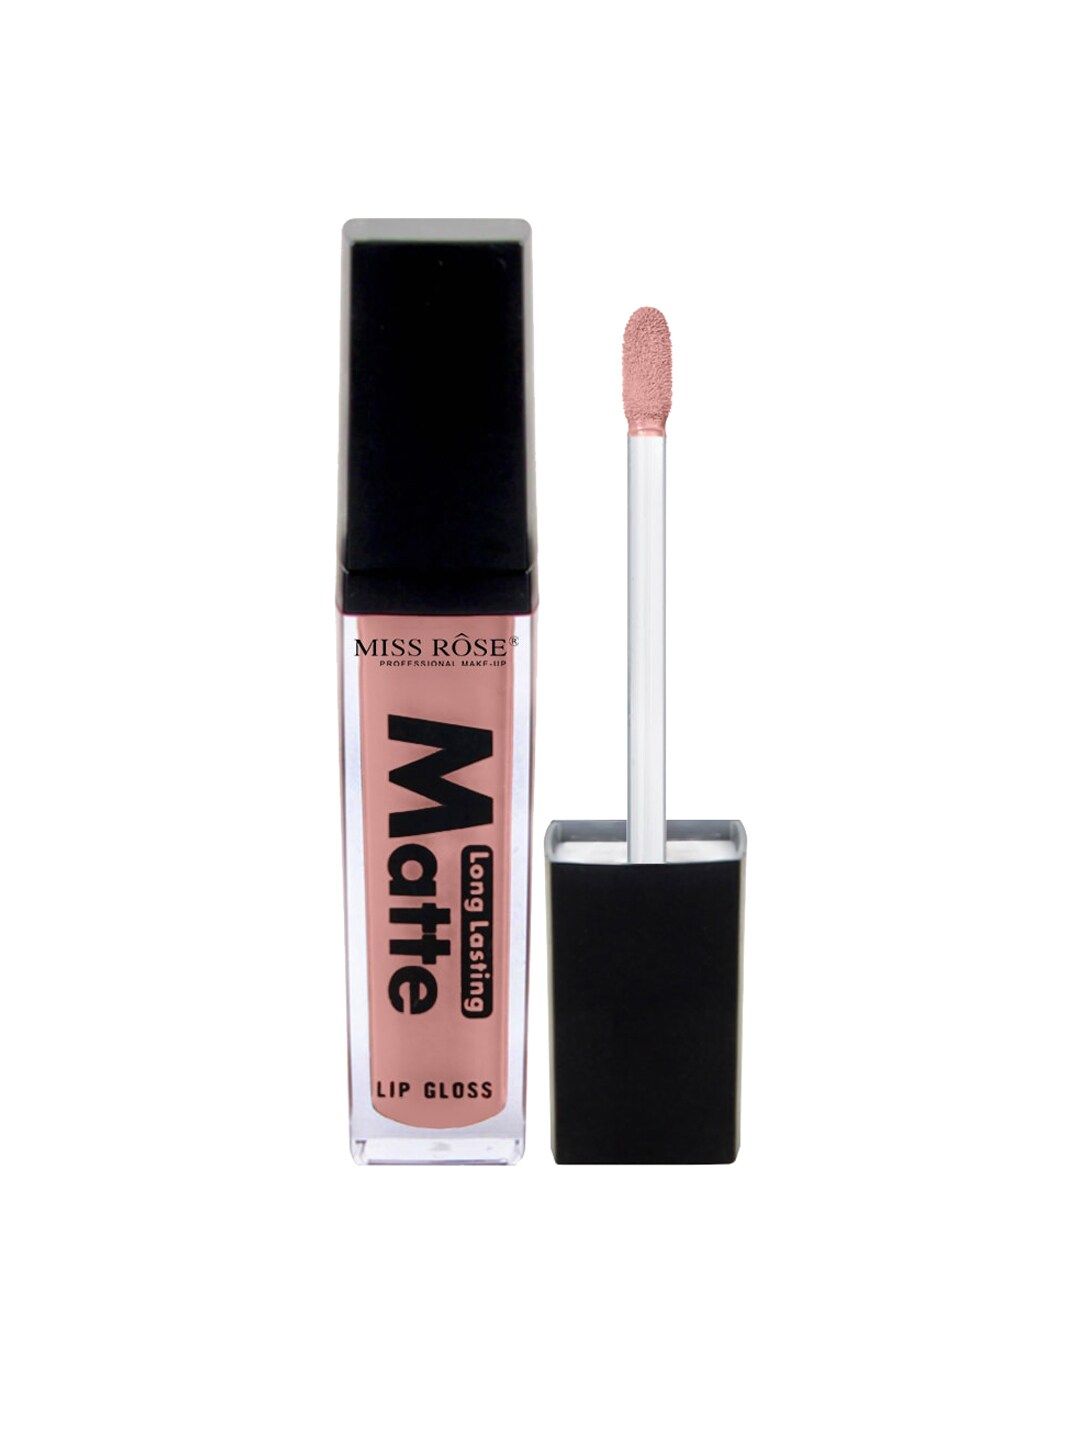 MISS ROSE Matte Long Lasting LipGloss 7701-002M 01 20 gm Price in India